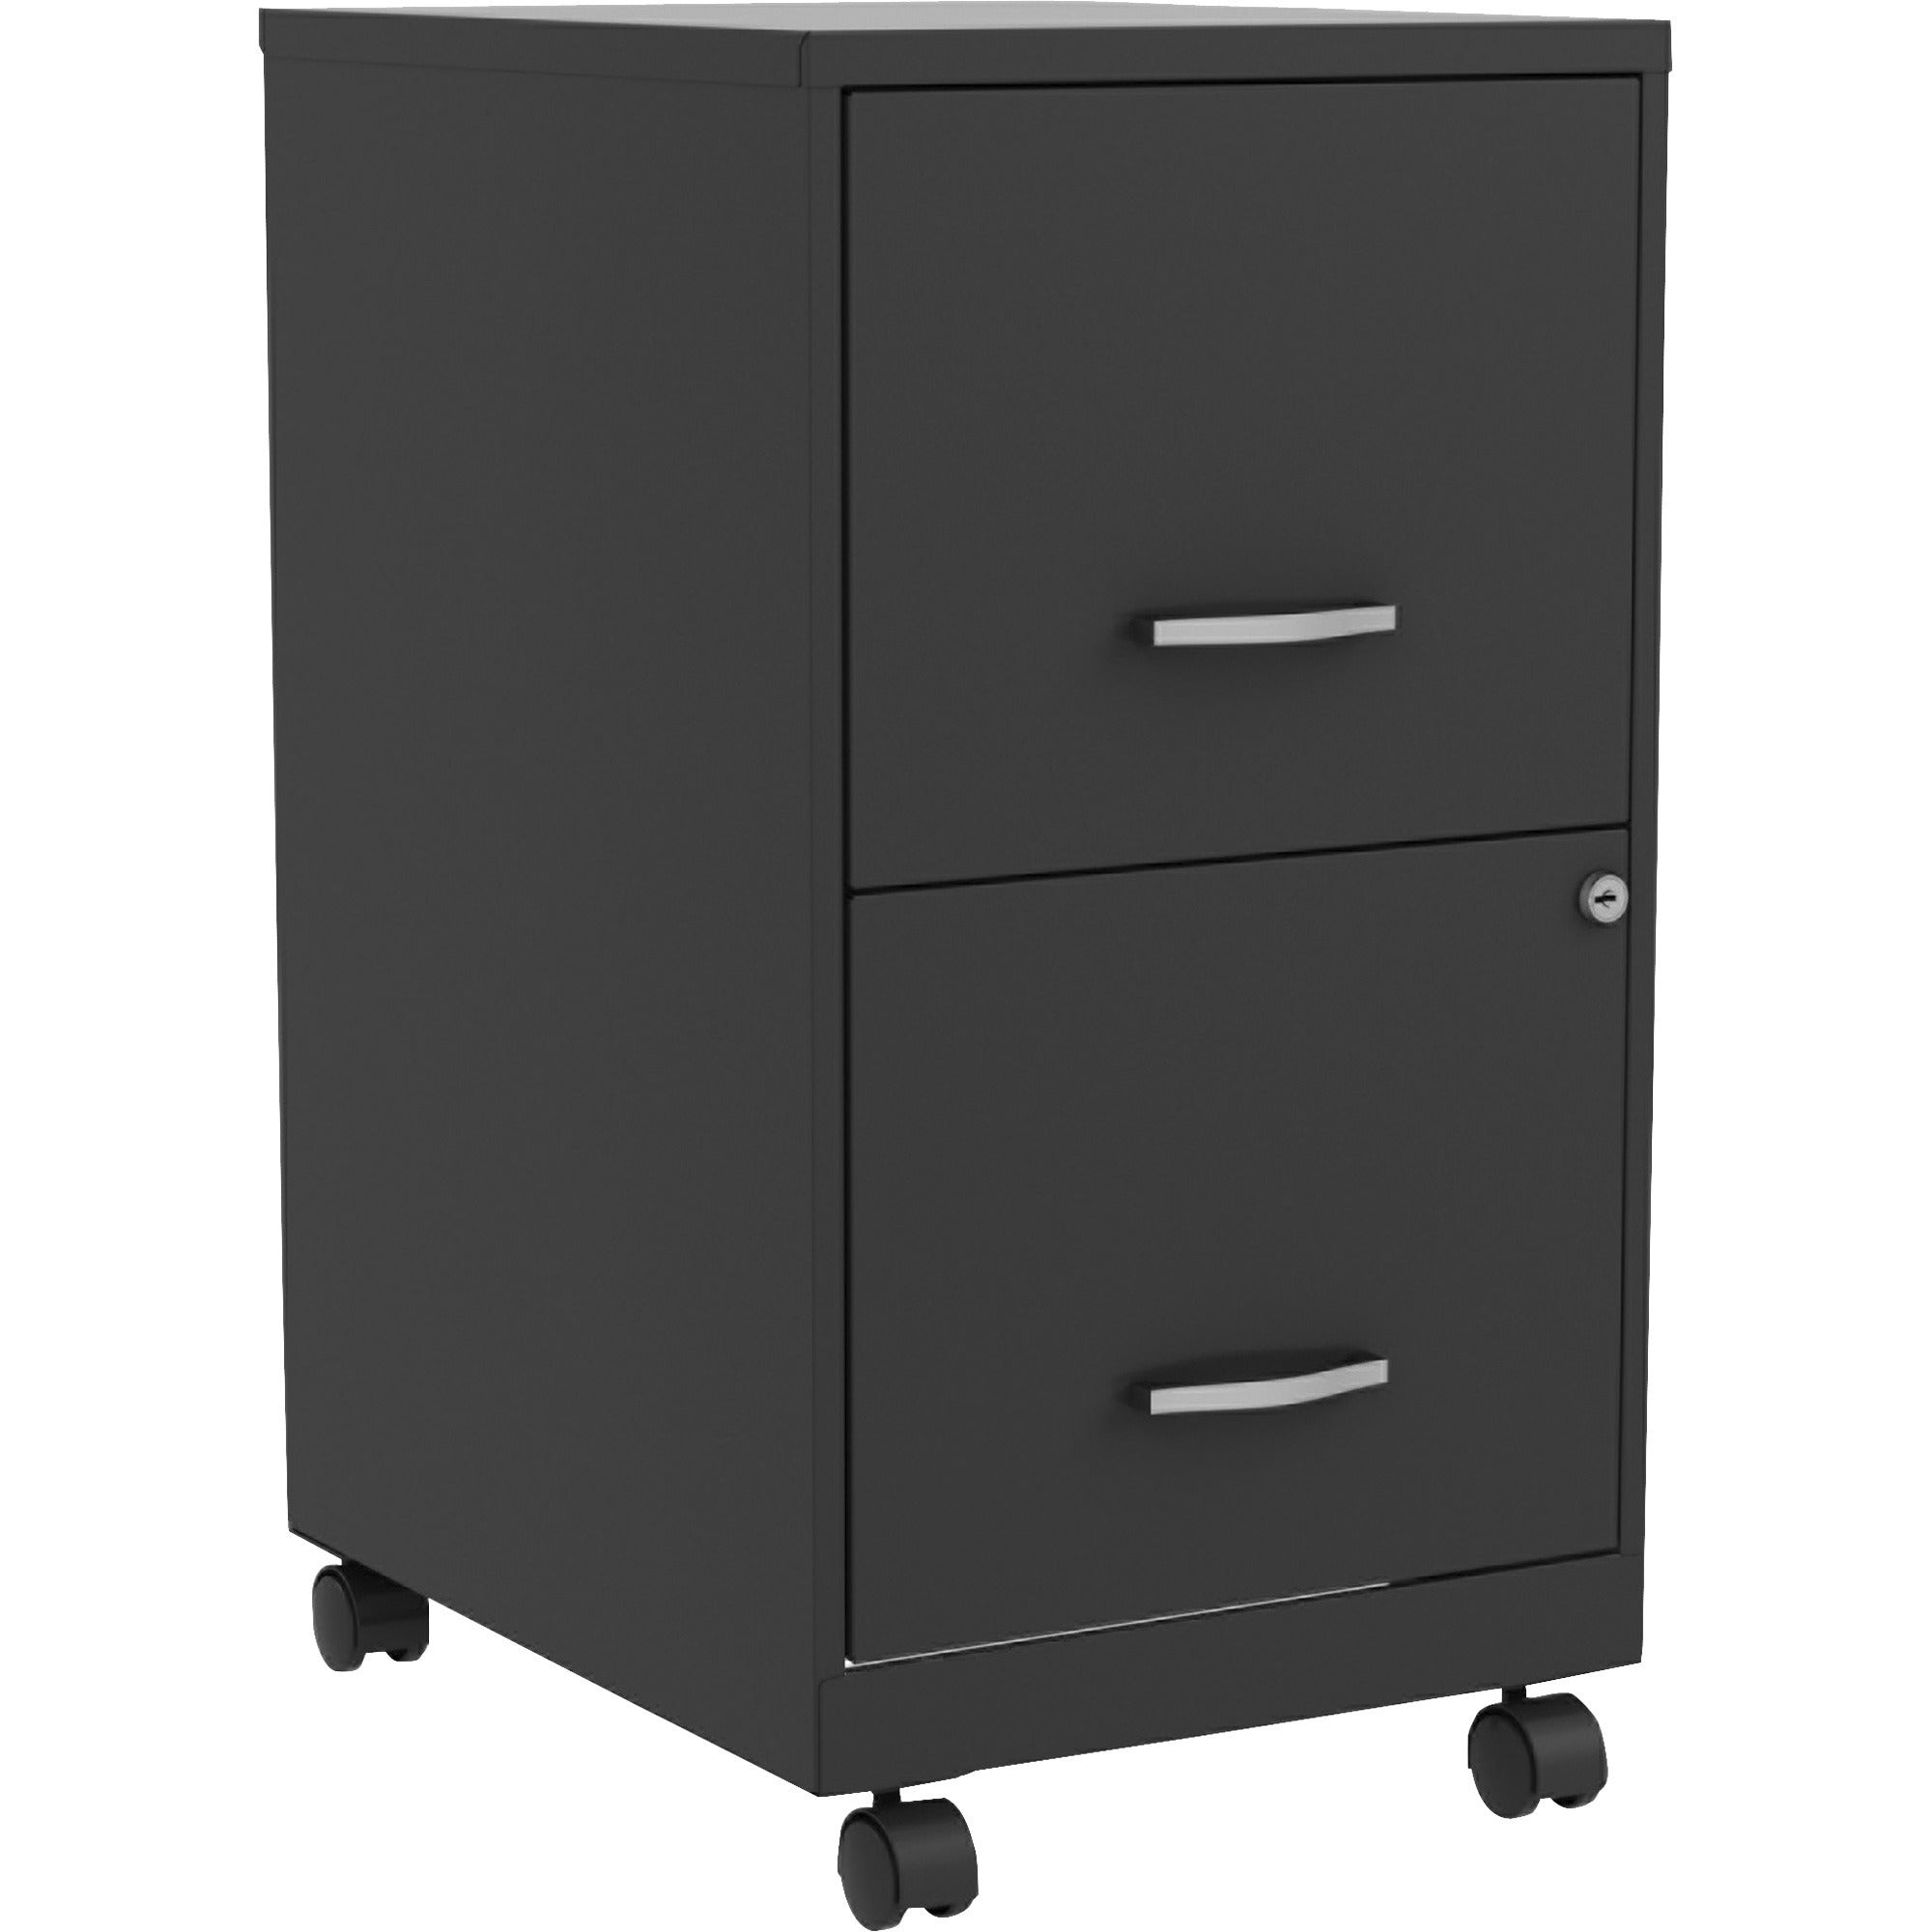 nusparc-mobile-file-cabinet-142-x-18-x-265-for-file-letter-mobility-locking-drawer-glide-suspension-3-4-drawer-extension-cam-lock-nonporous-surface-black-painted-steel-steel-recycled_nprvf218ambk - 1